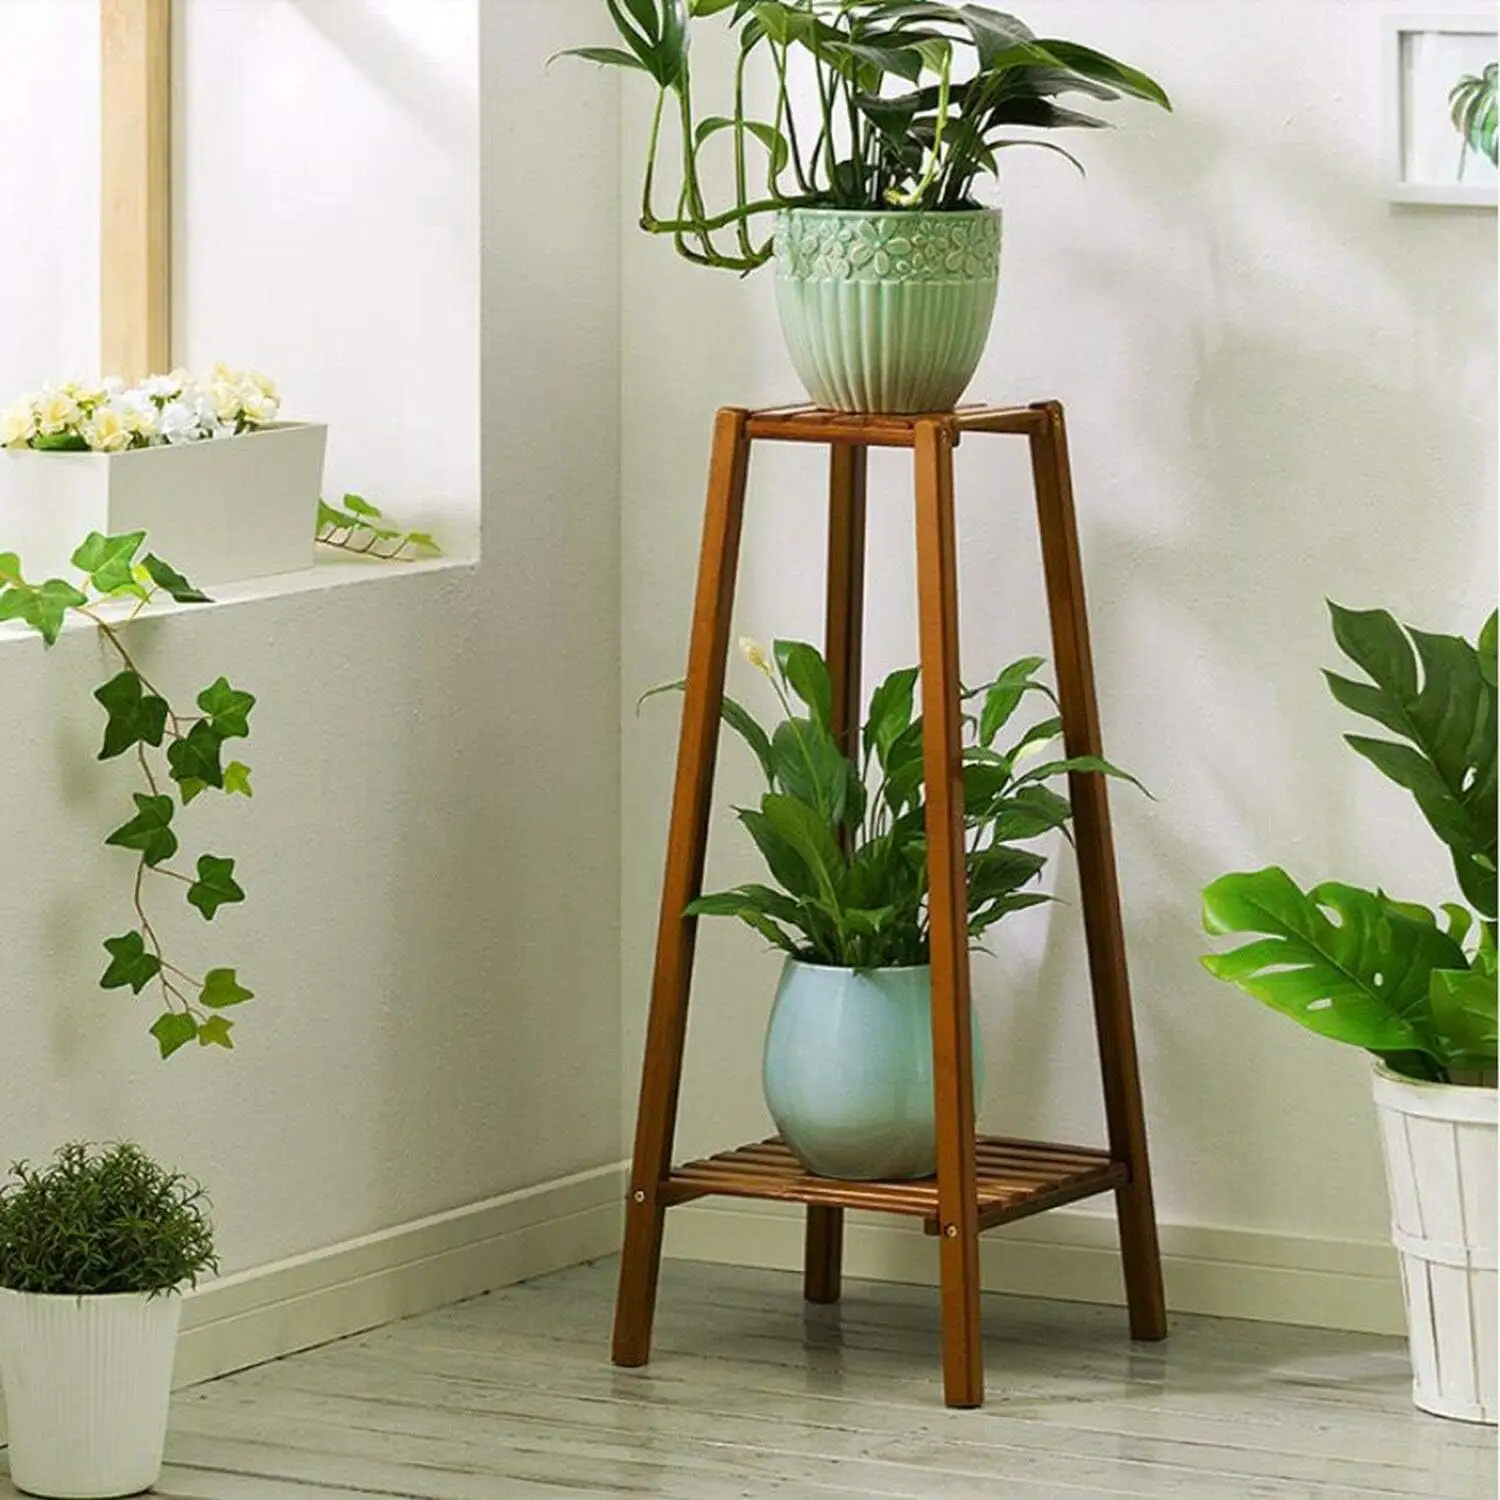 Modern 2 Tier Vintage Design Bamboo Tall Plant Stand Pot Holder Small Space Flower Shelf Rack Display Table